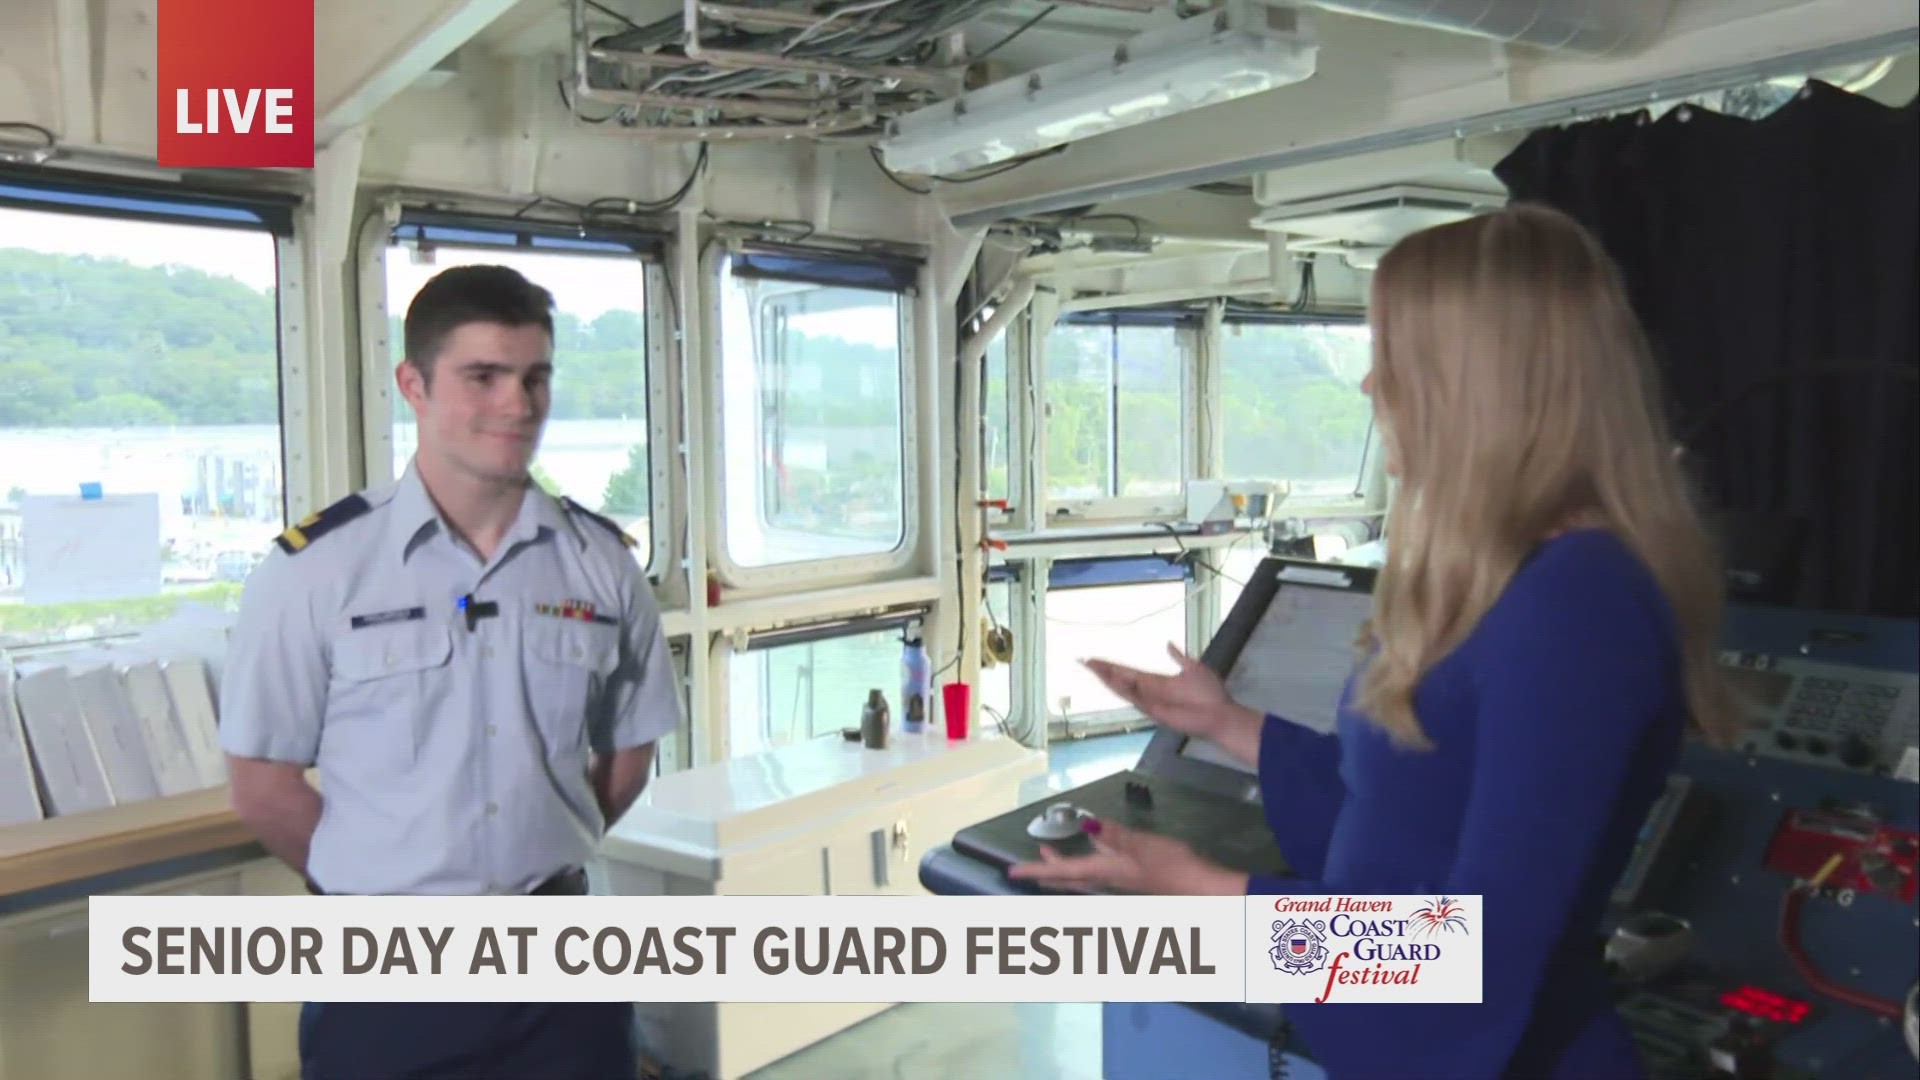 The Coast Guard Festival is offering tours of the Mackinaw and other cutters from 10AM to 8PM Wednesday.